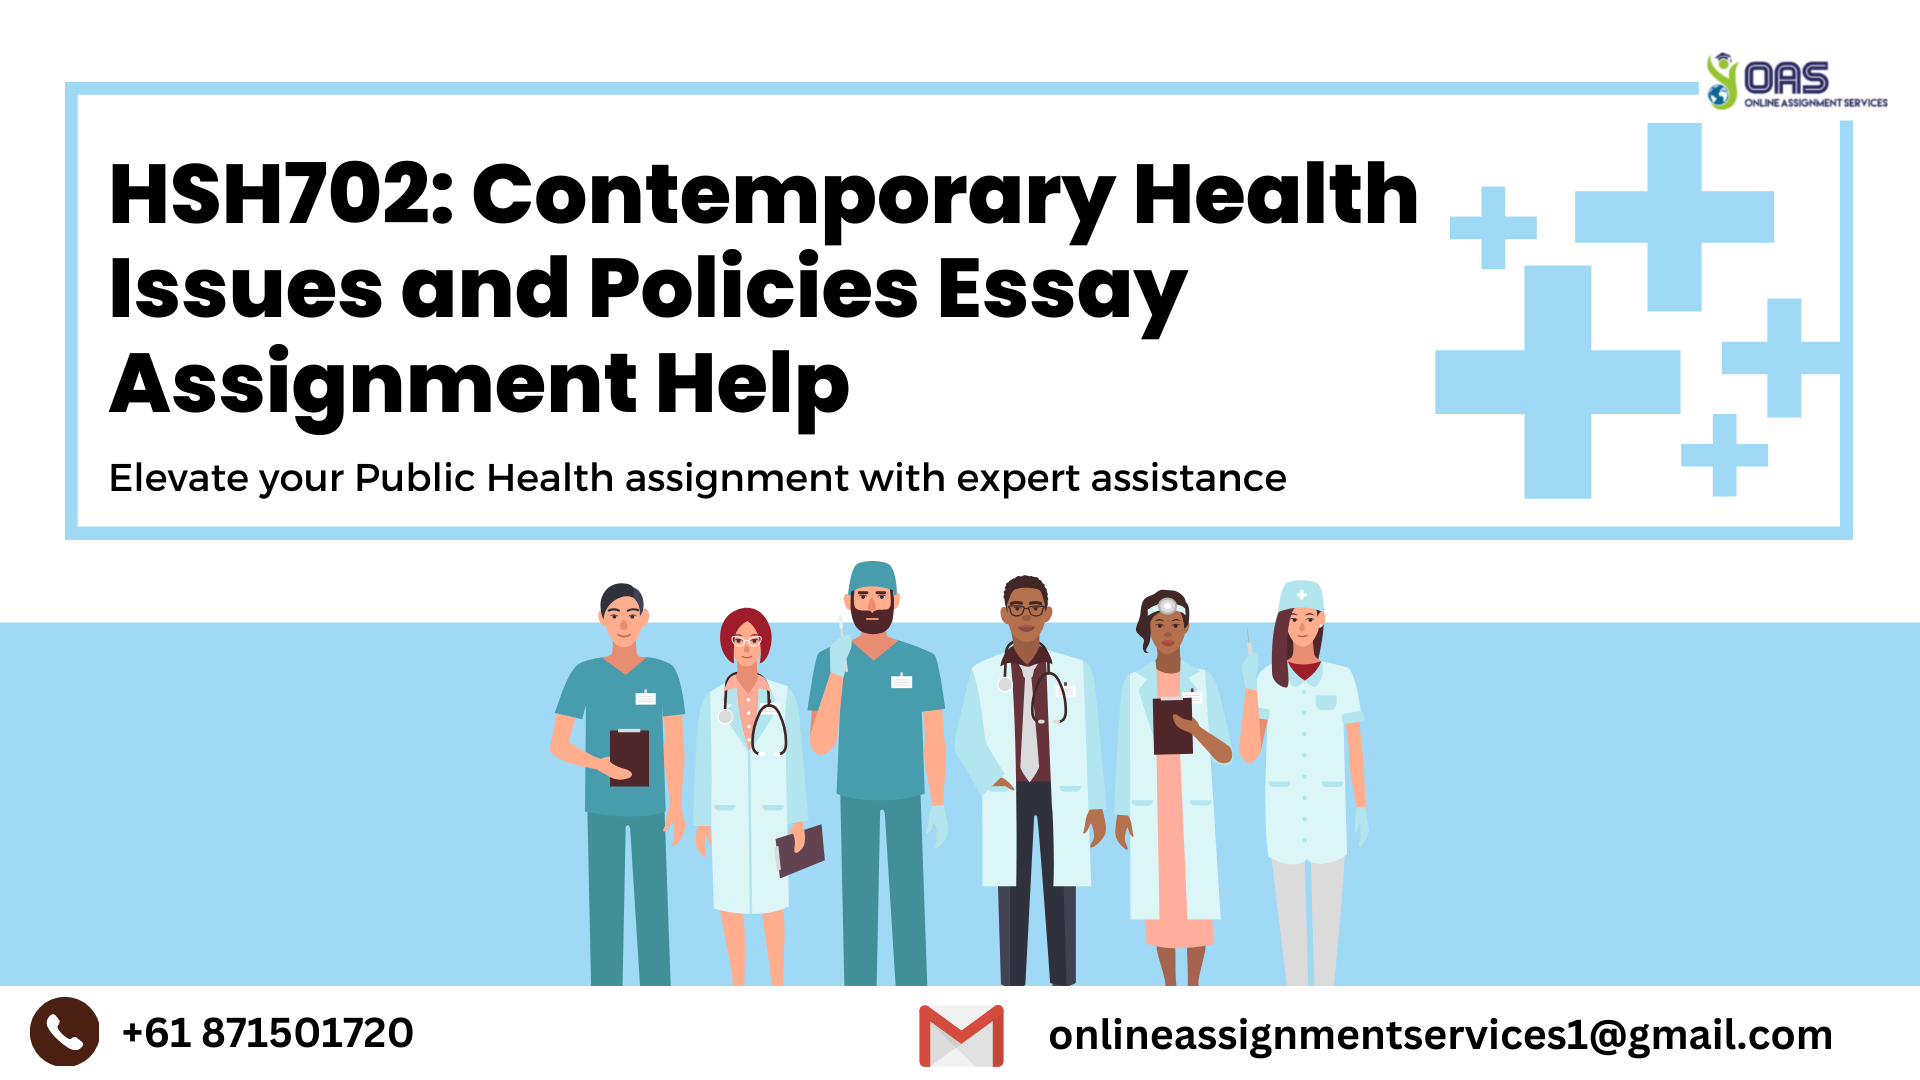 HSH702 Contemporary Health Issues Essay Assignment Help  - Online Assignment Services